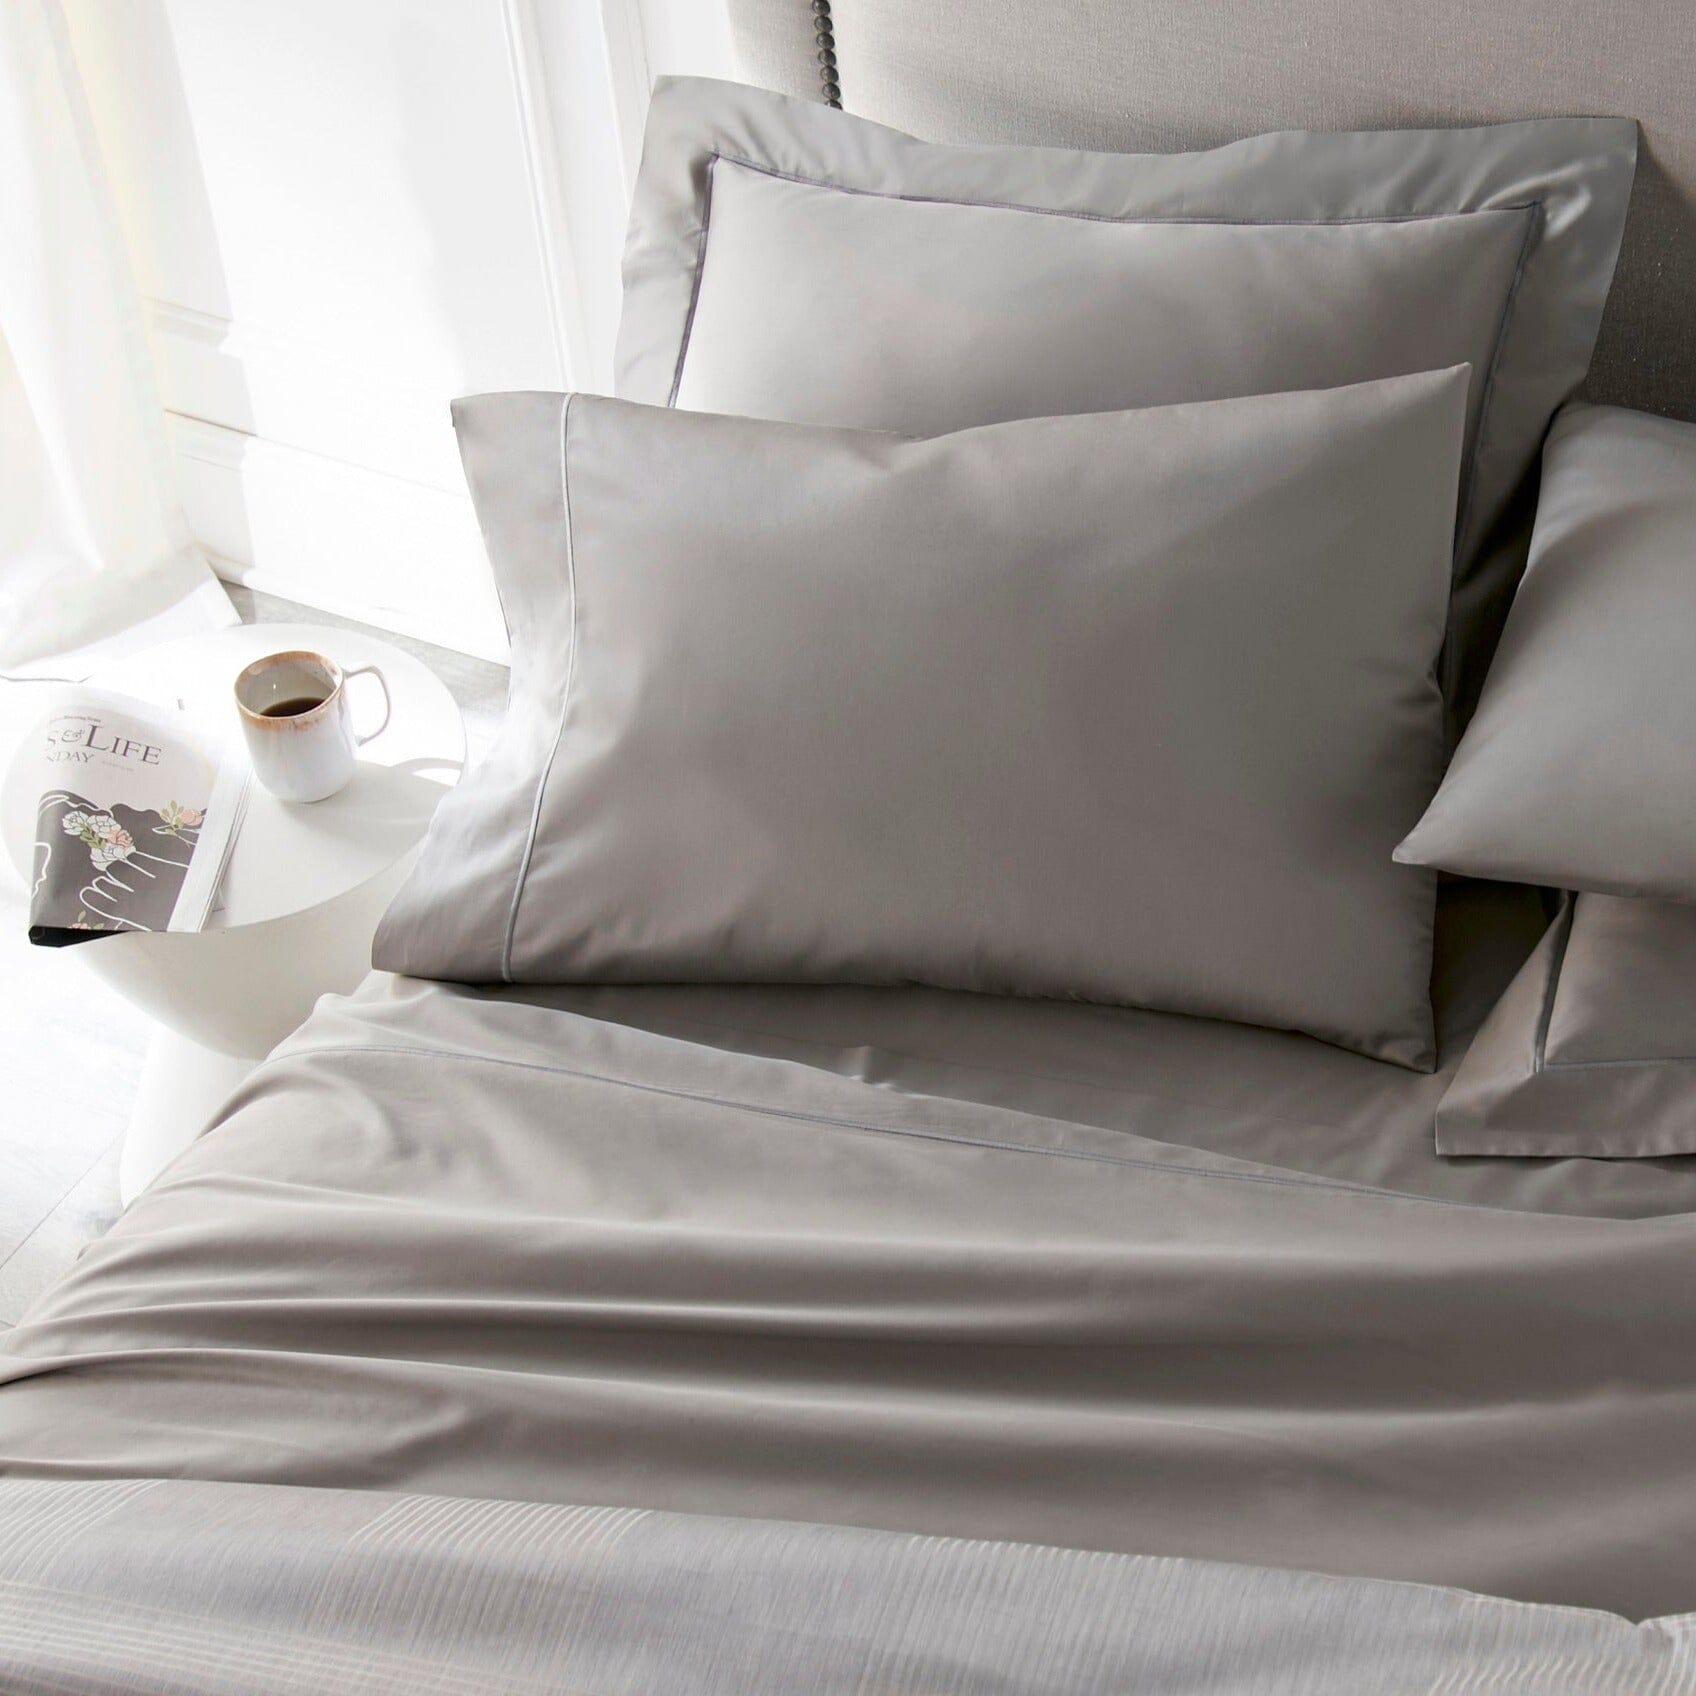 Pillowcases - Soprano Pewter Bedding - Peacock Alley Soprano Sateen at Fig Linens and Home